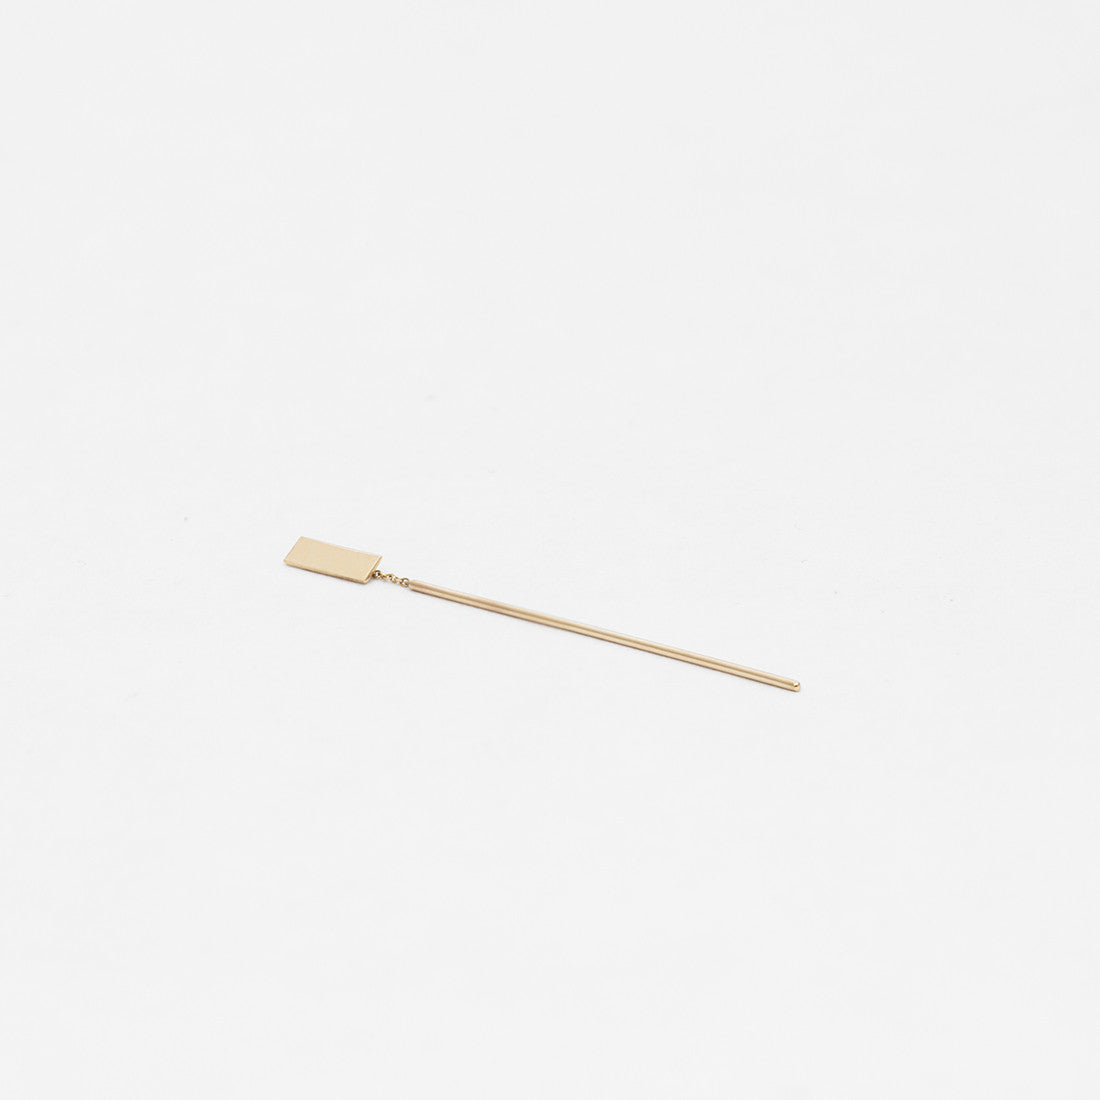 Tili Long Minimal Pull Through Earring in 14k Gold By SHW Fine Jewelry NYC